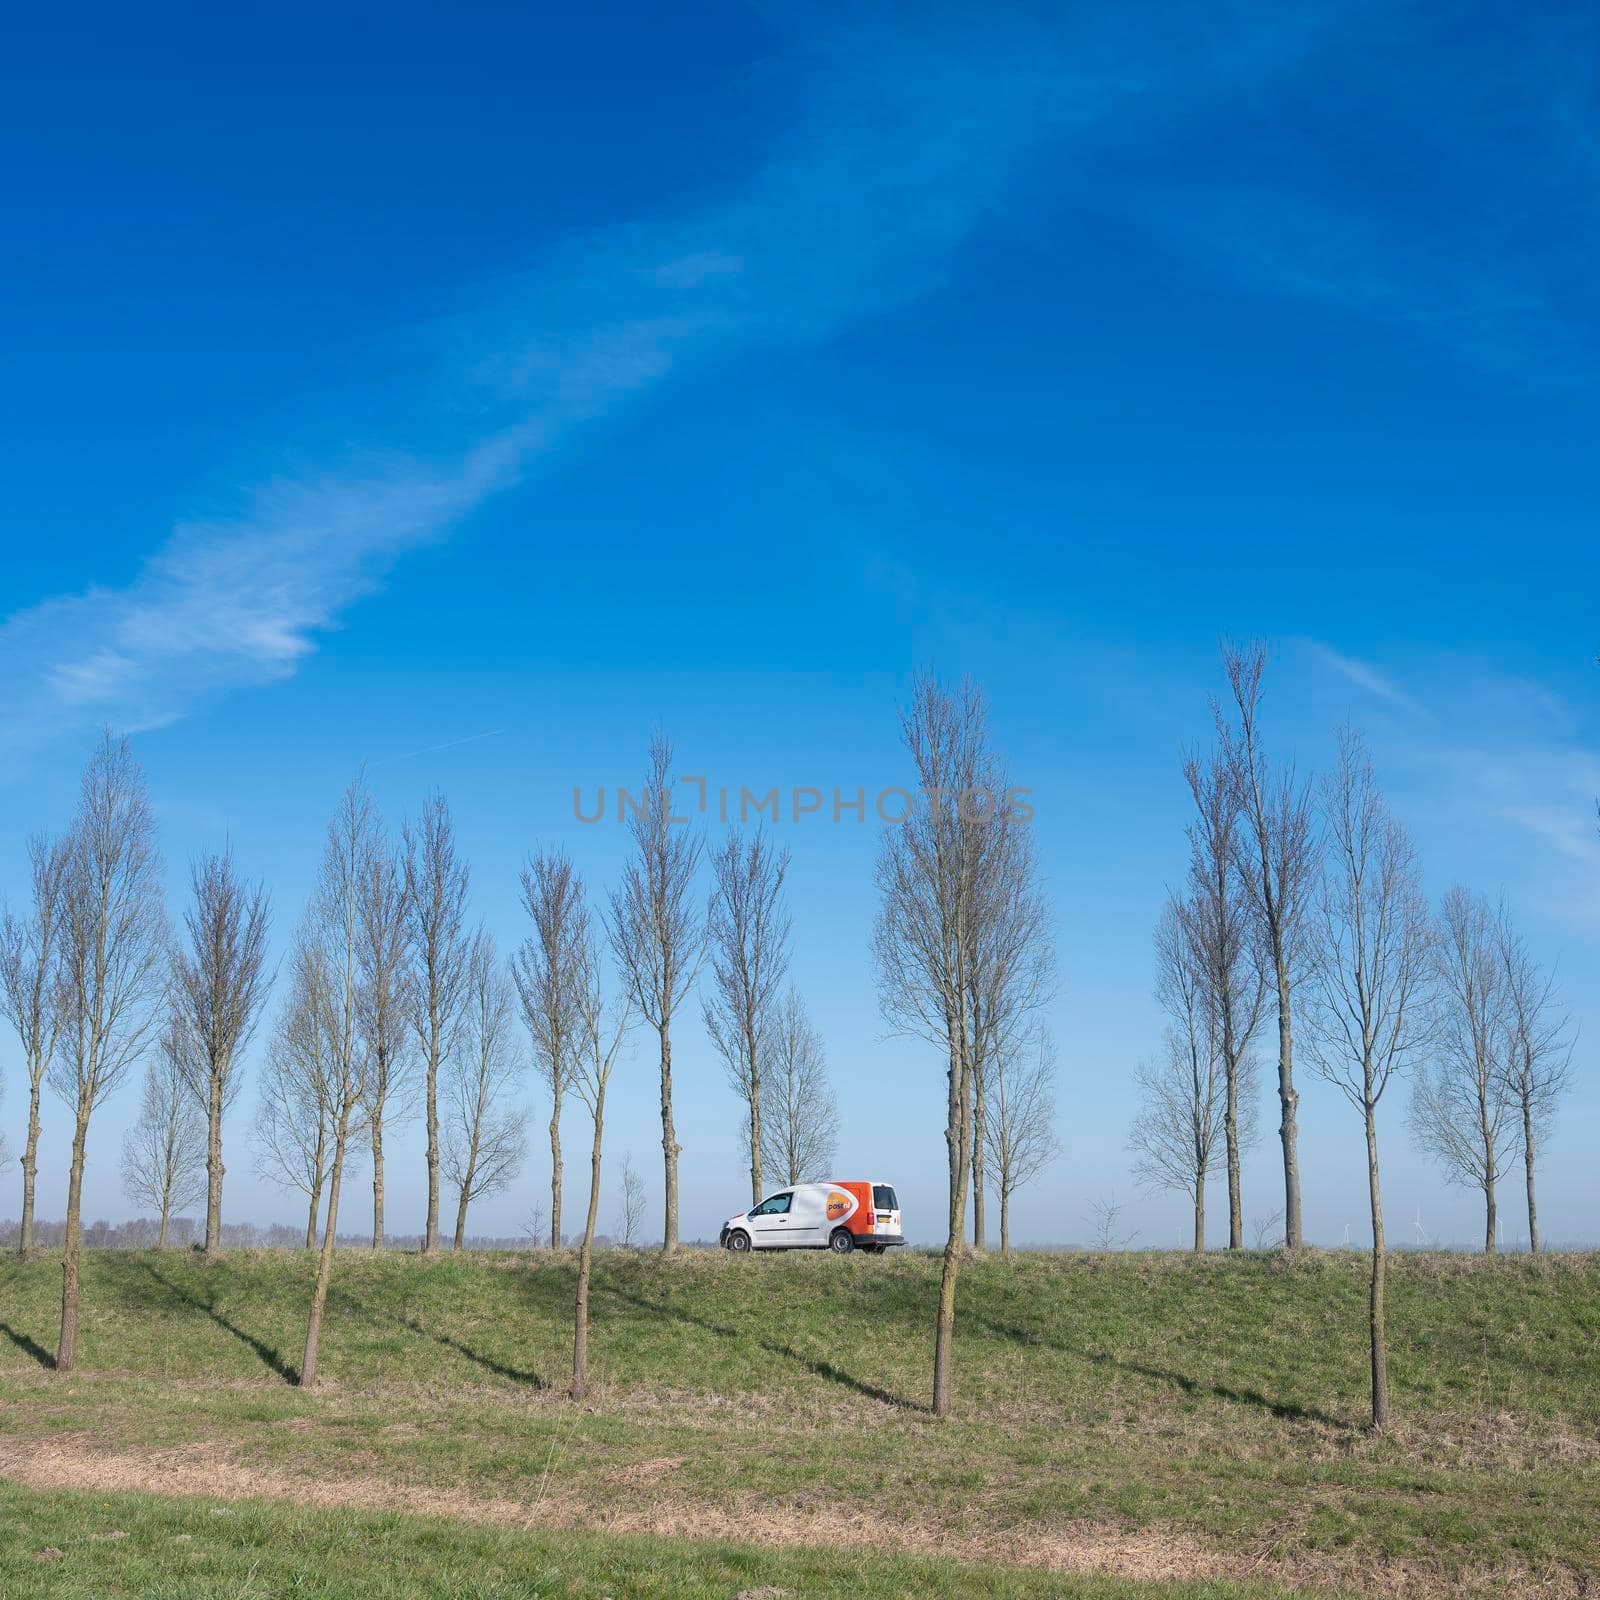 middelharnis, netherlands, 30 march 2021: car of mail delivery on dyke of goeree overflkakkee in the netherlands under blue sky